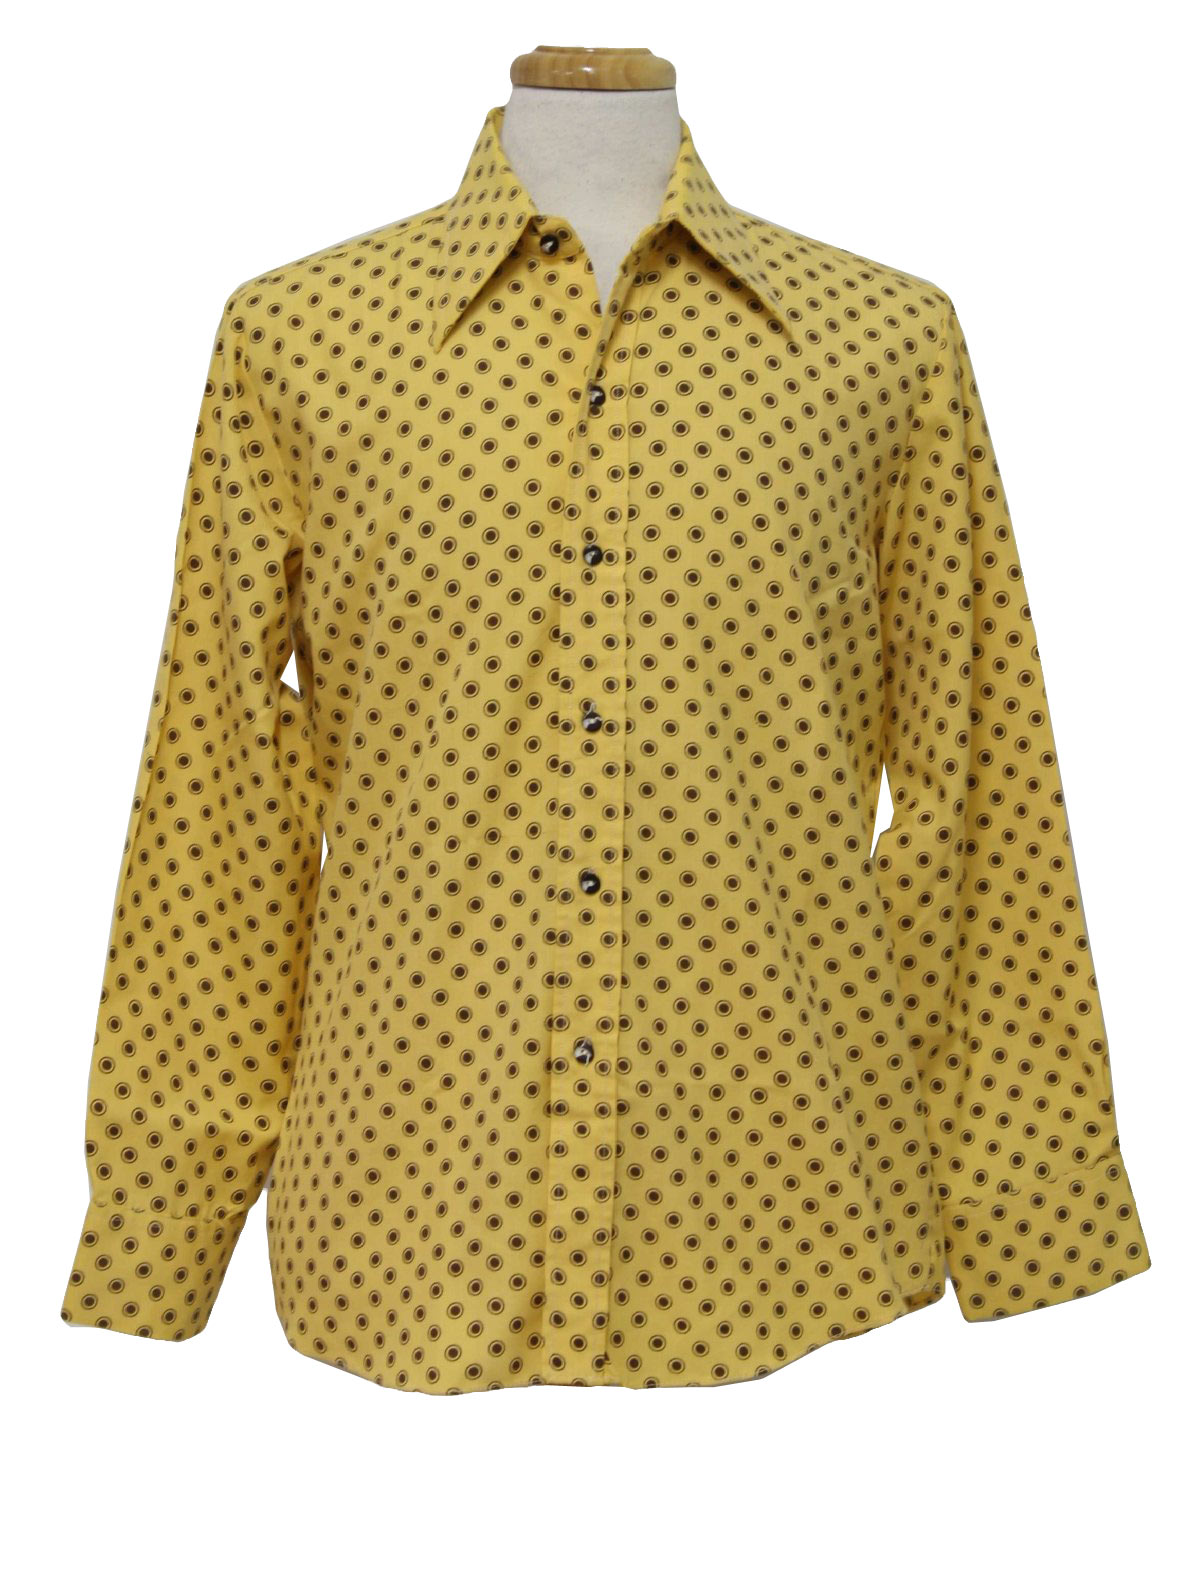 Seventies Vintage Shirt: Early 70s -Aladin Awonderful Shirt- Mens gold ...